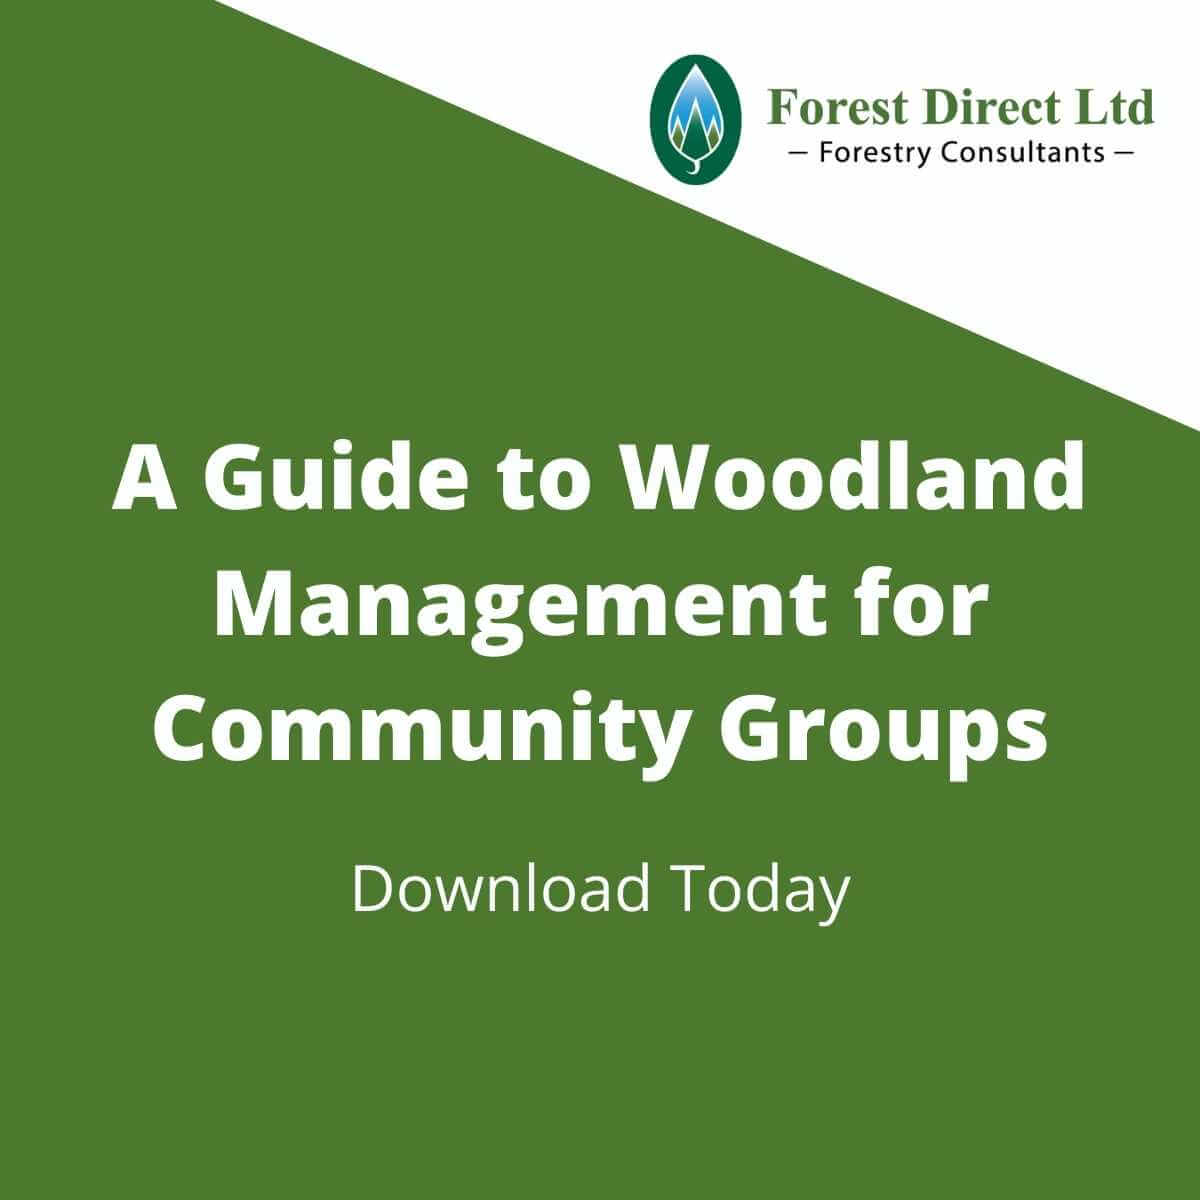 A Guide for Community Groups Managing Woodlands